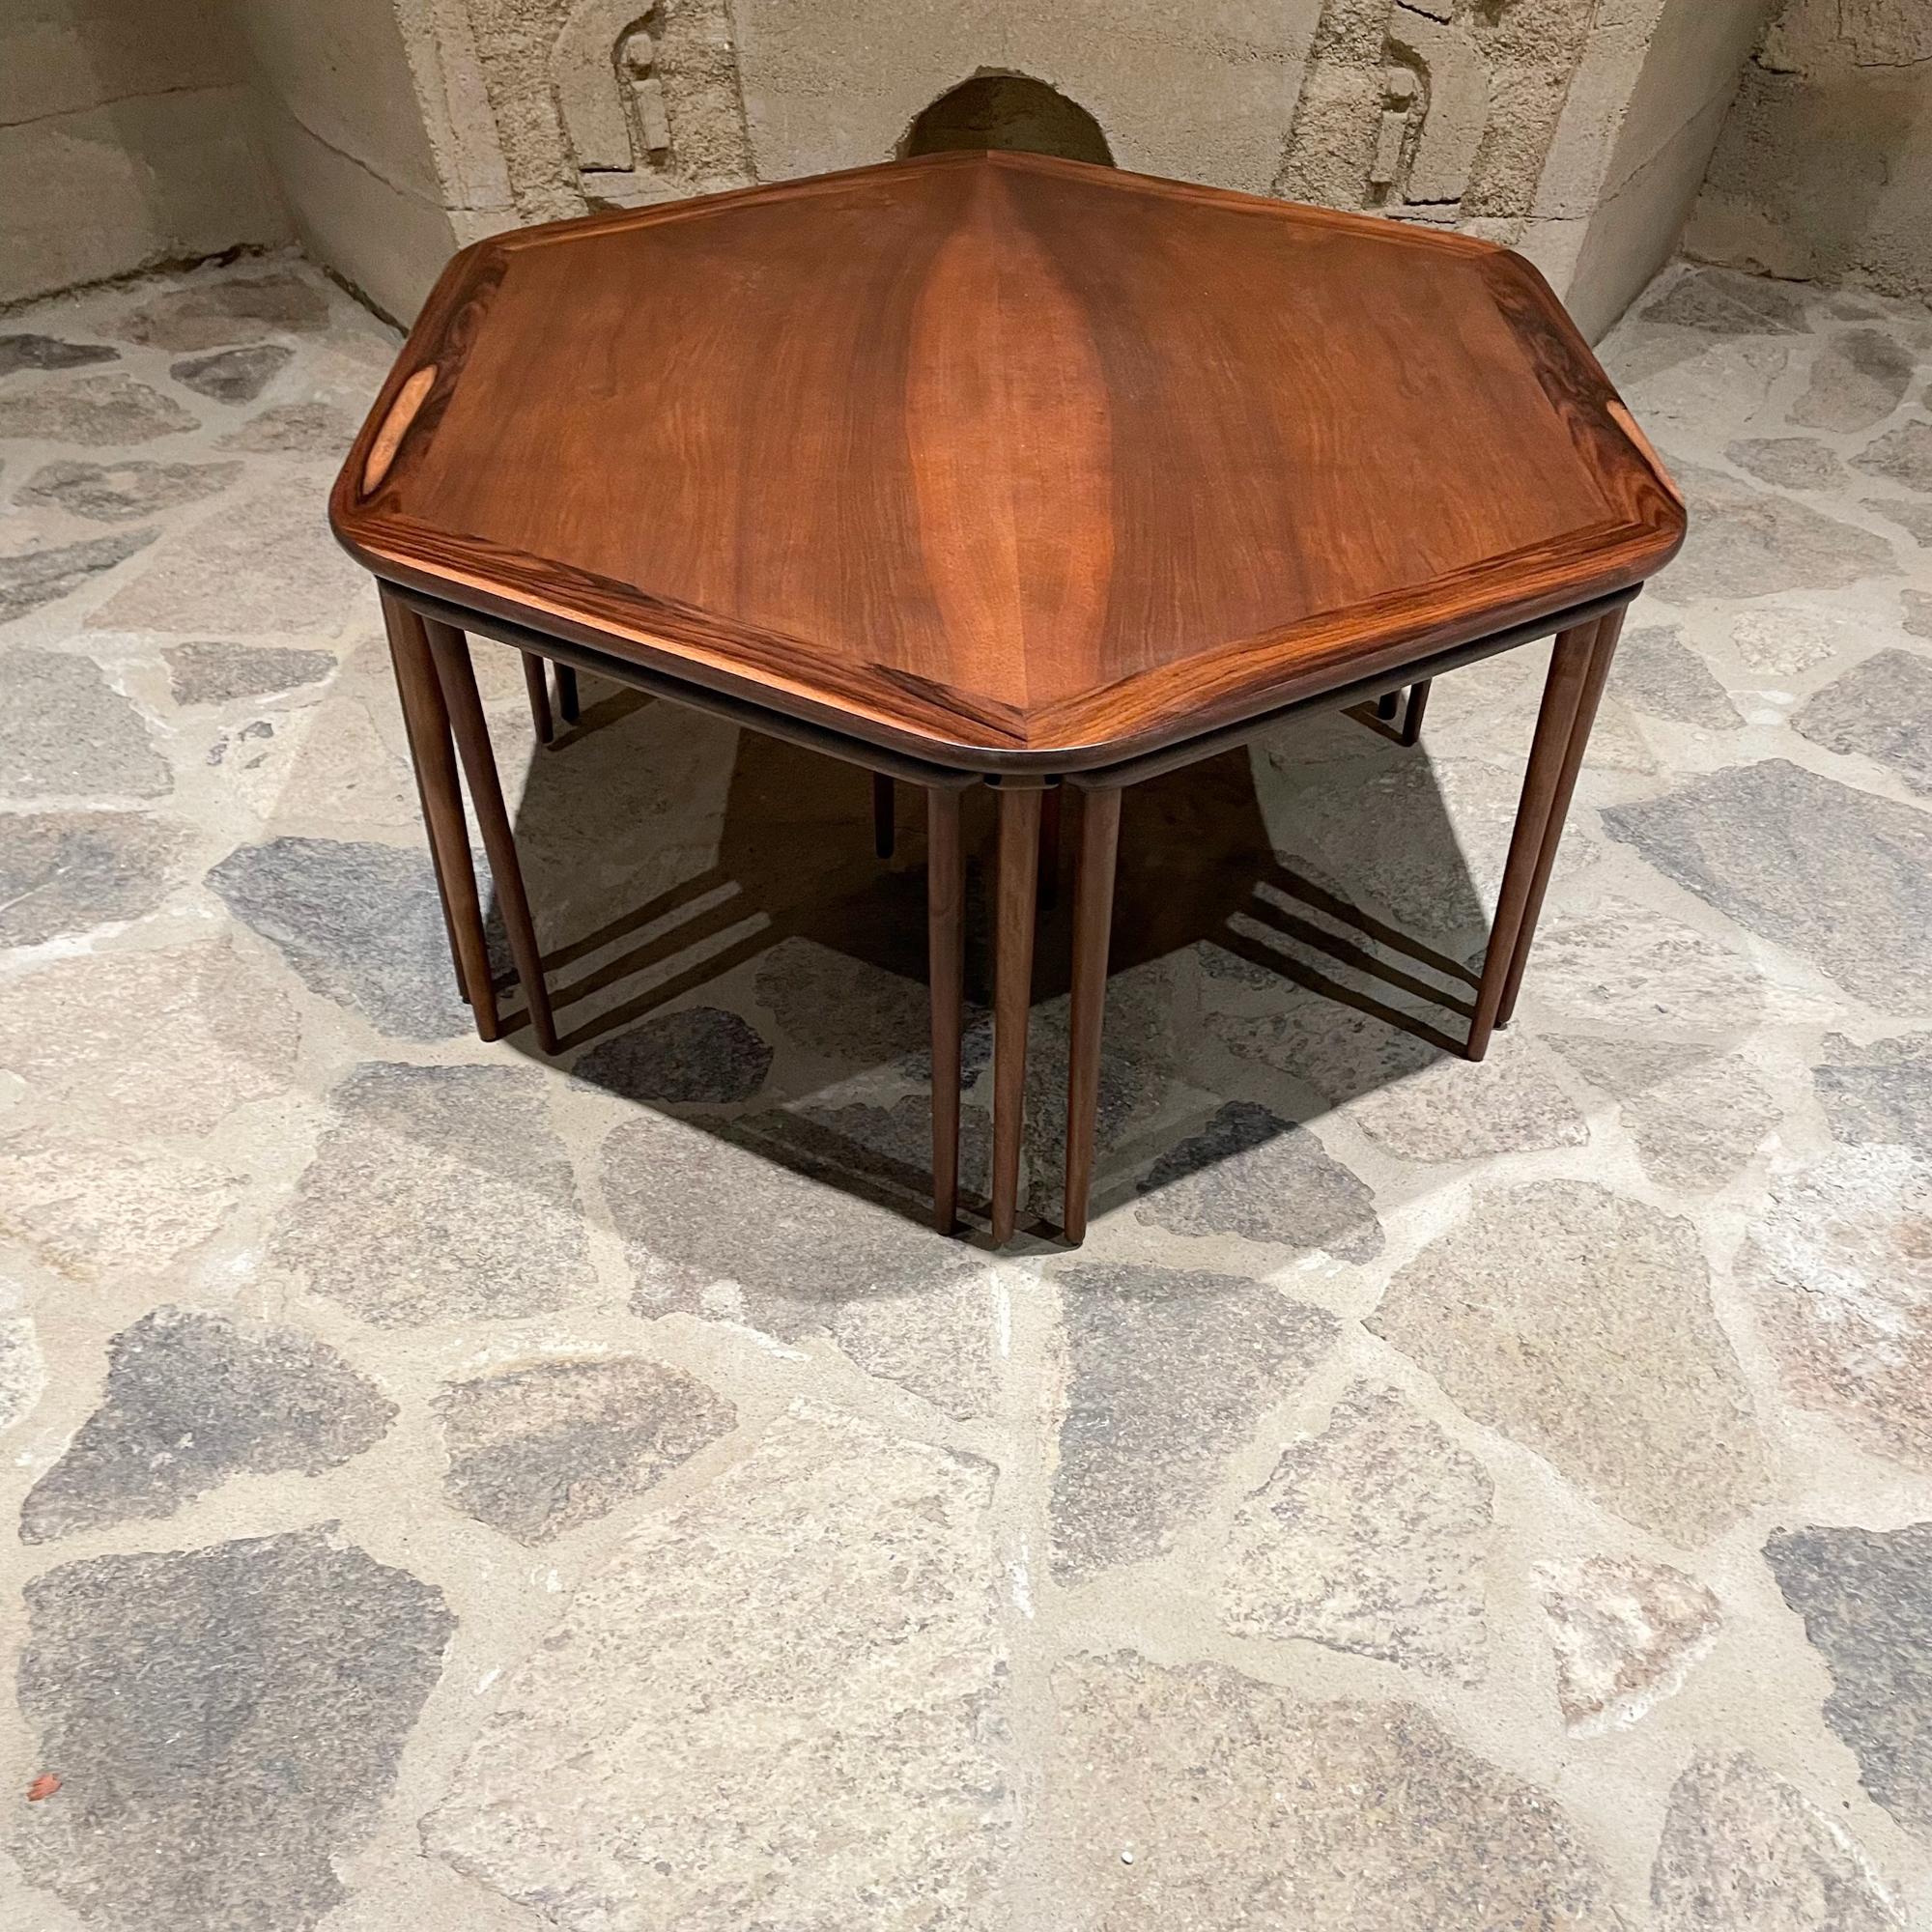 Set of 6 rosewood nesting tables tucked underneath hexagonal coffee table. 
Made Denmark 1950s
Set includes 7 pieces.
 17.38 tall x 34.13 depth x .38 at widest point.
Triangular side tables are 16.38 tall x 17 x 17
Table retains original stamp.